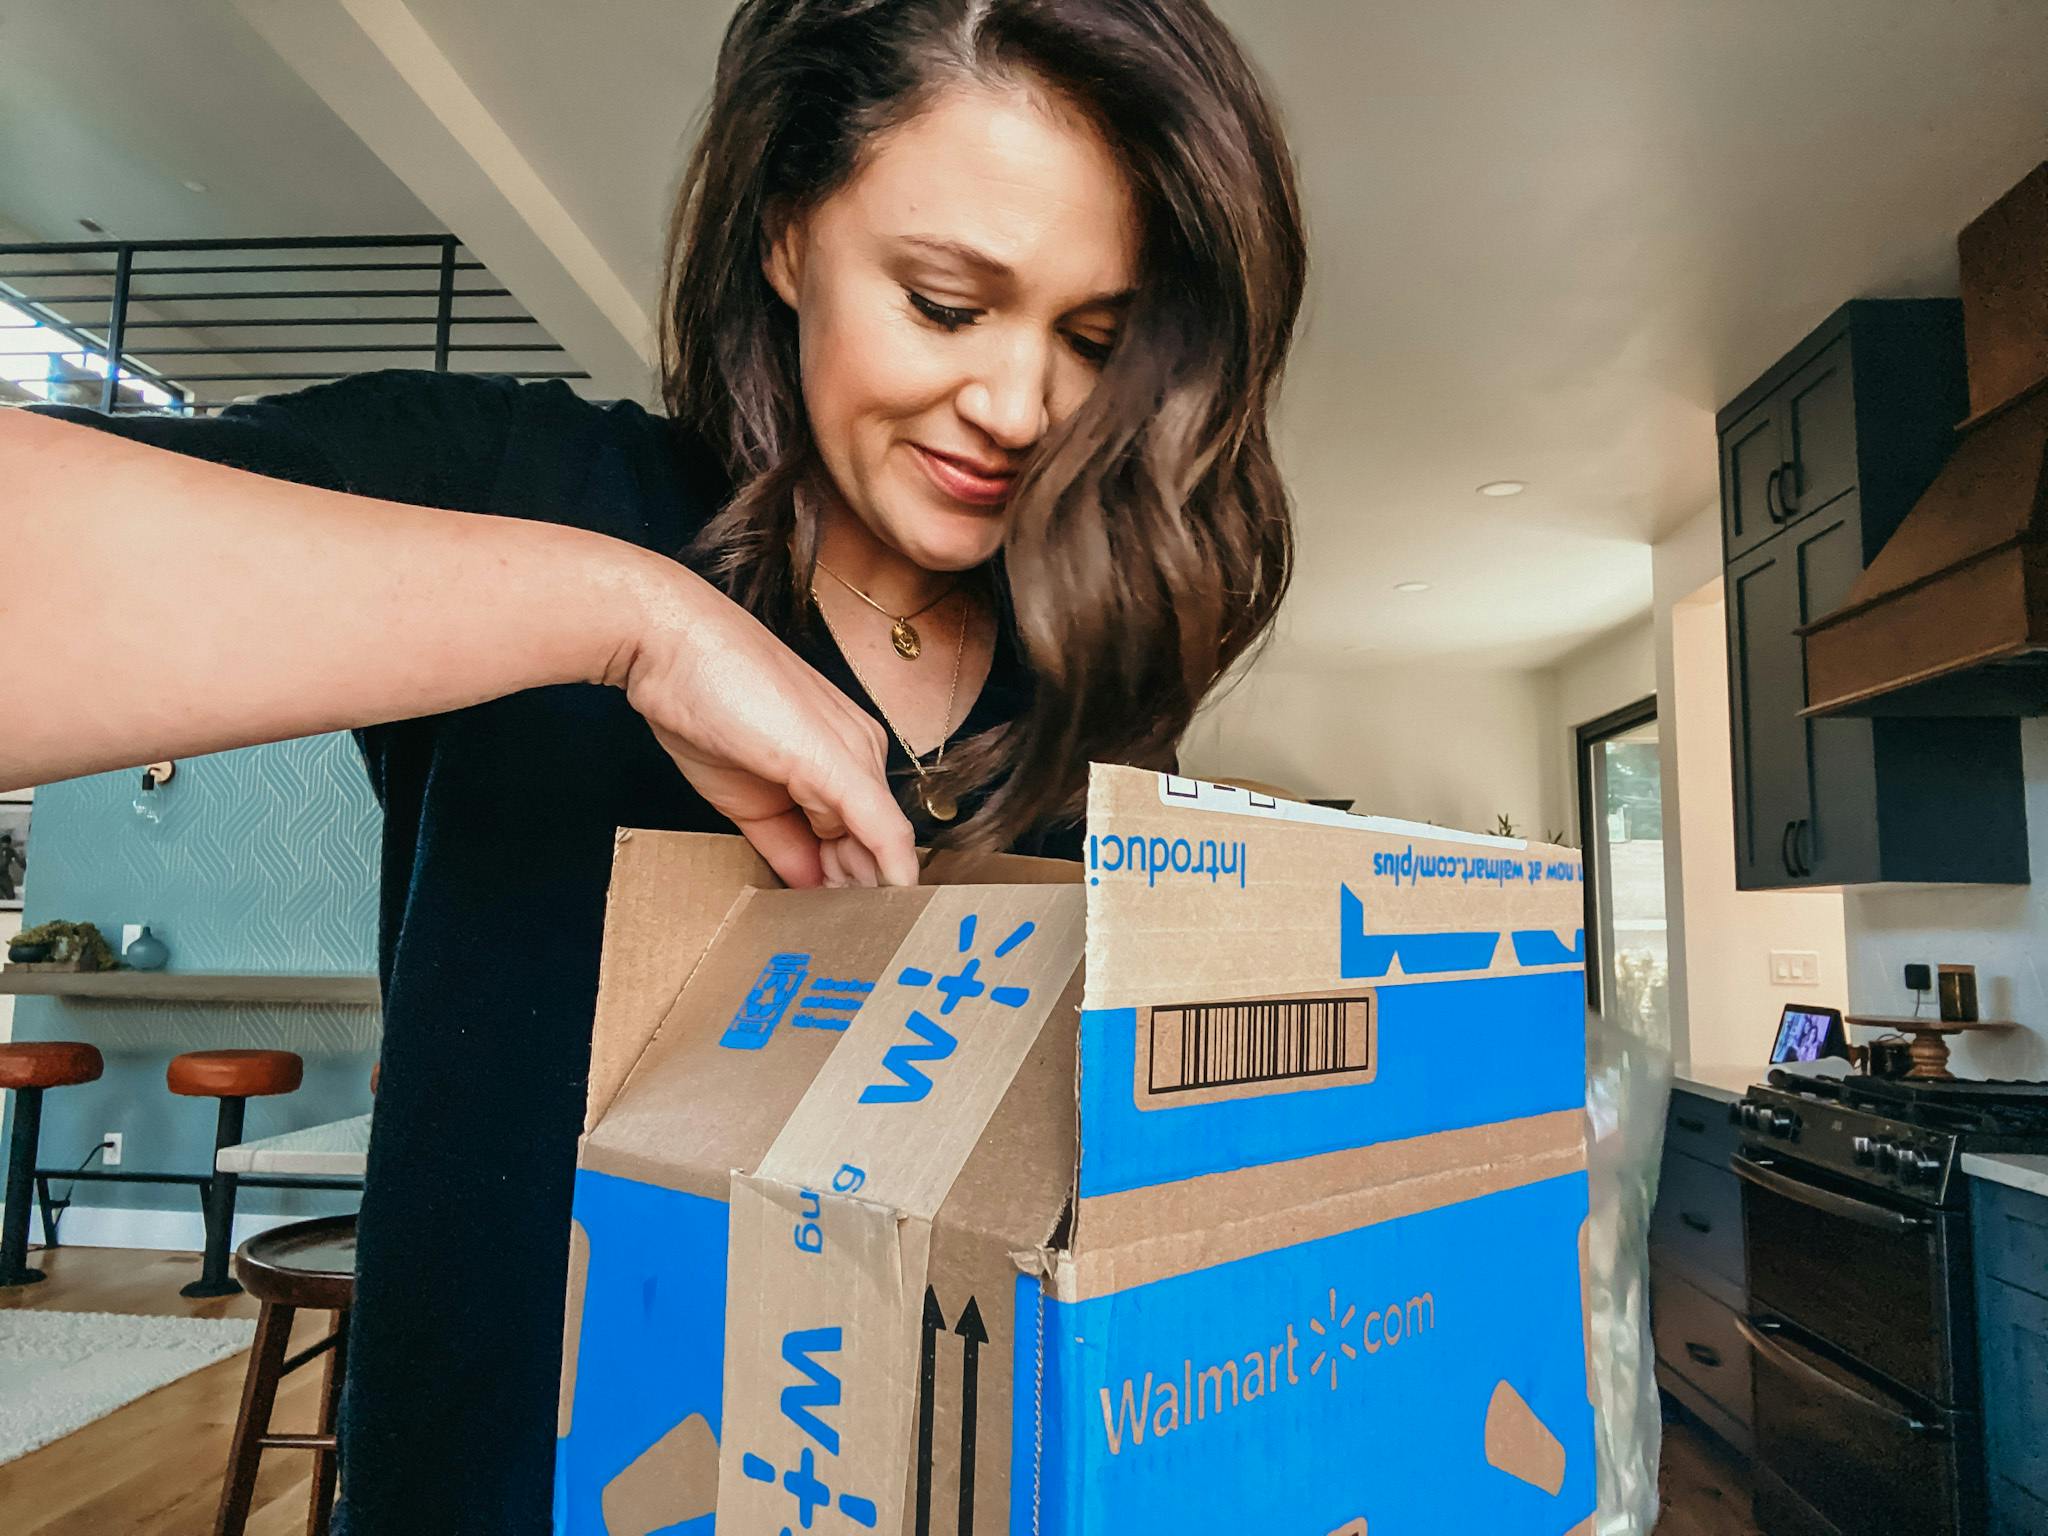 A woman opening a Walmart+ box in her kitchen.